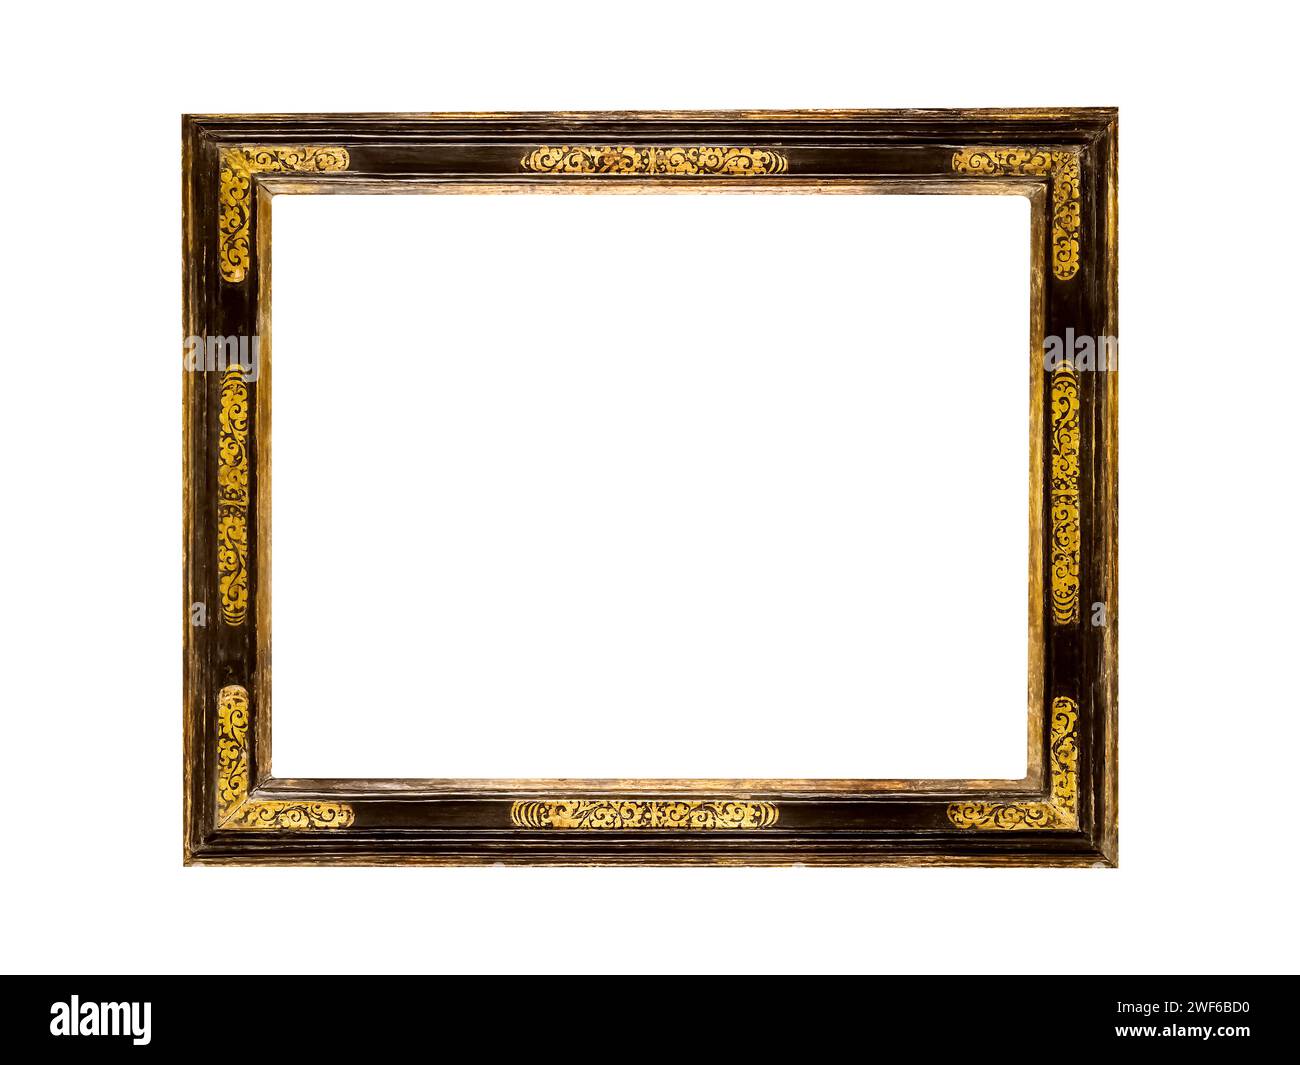 Wooden old art frame vintage baroque classical flourishes decorative black gold Stock Photo